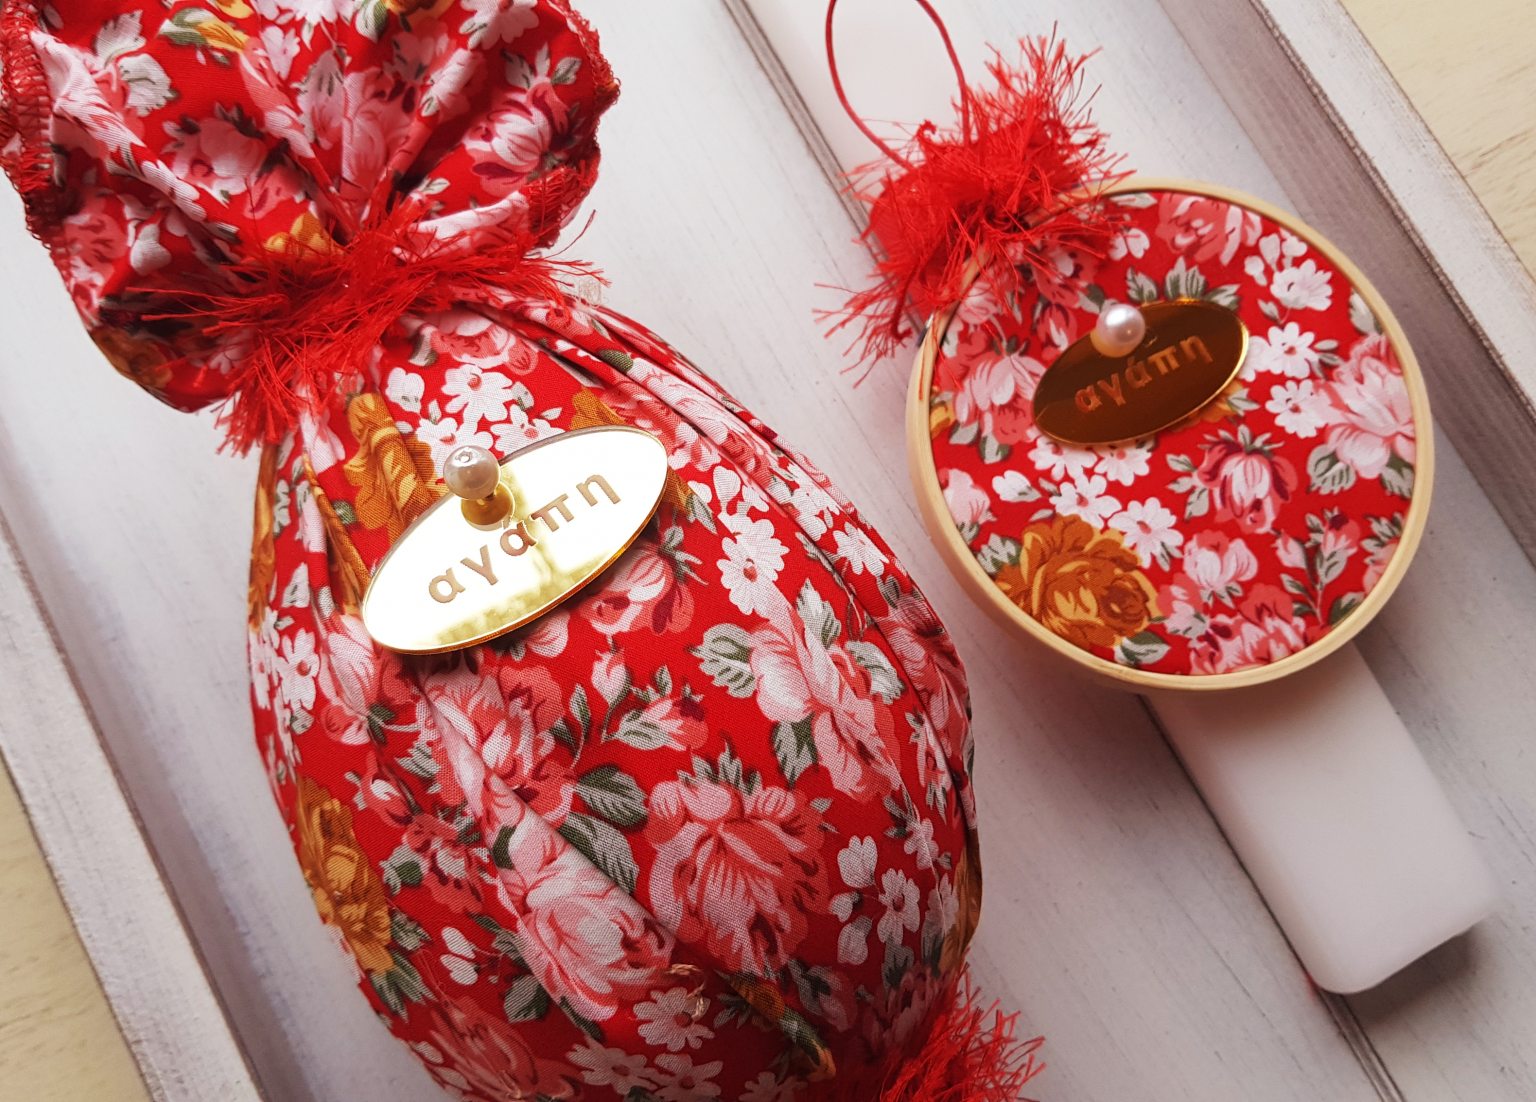 Handmade Easter candle & decorative egg (red)